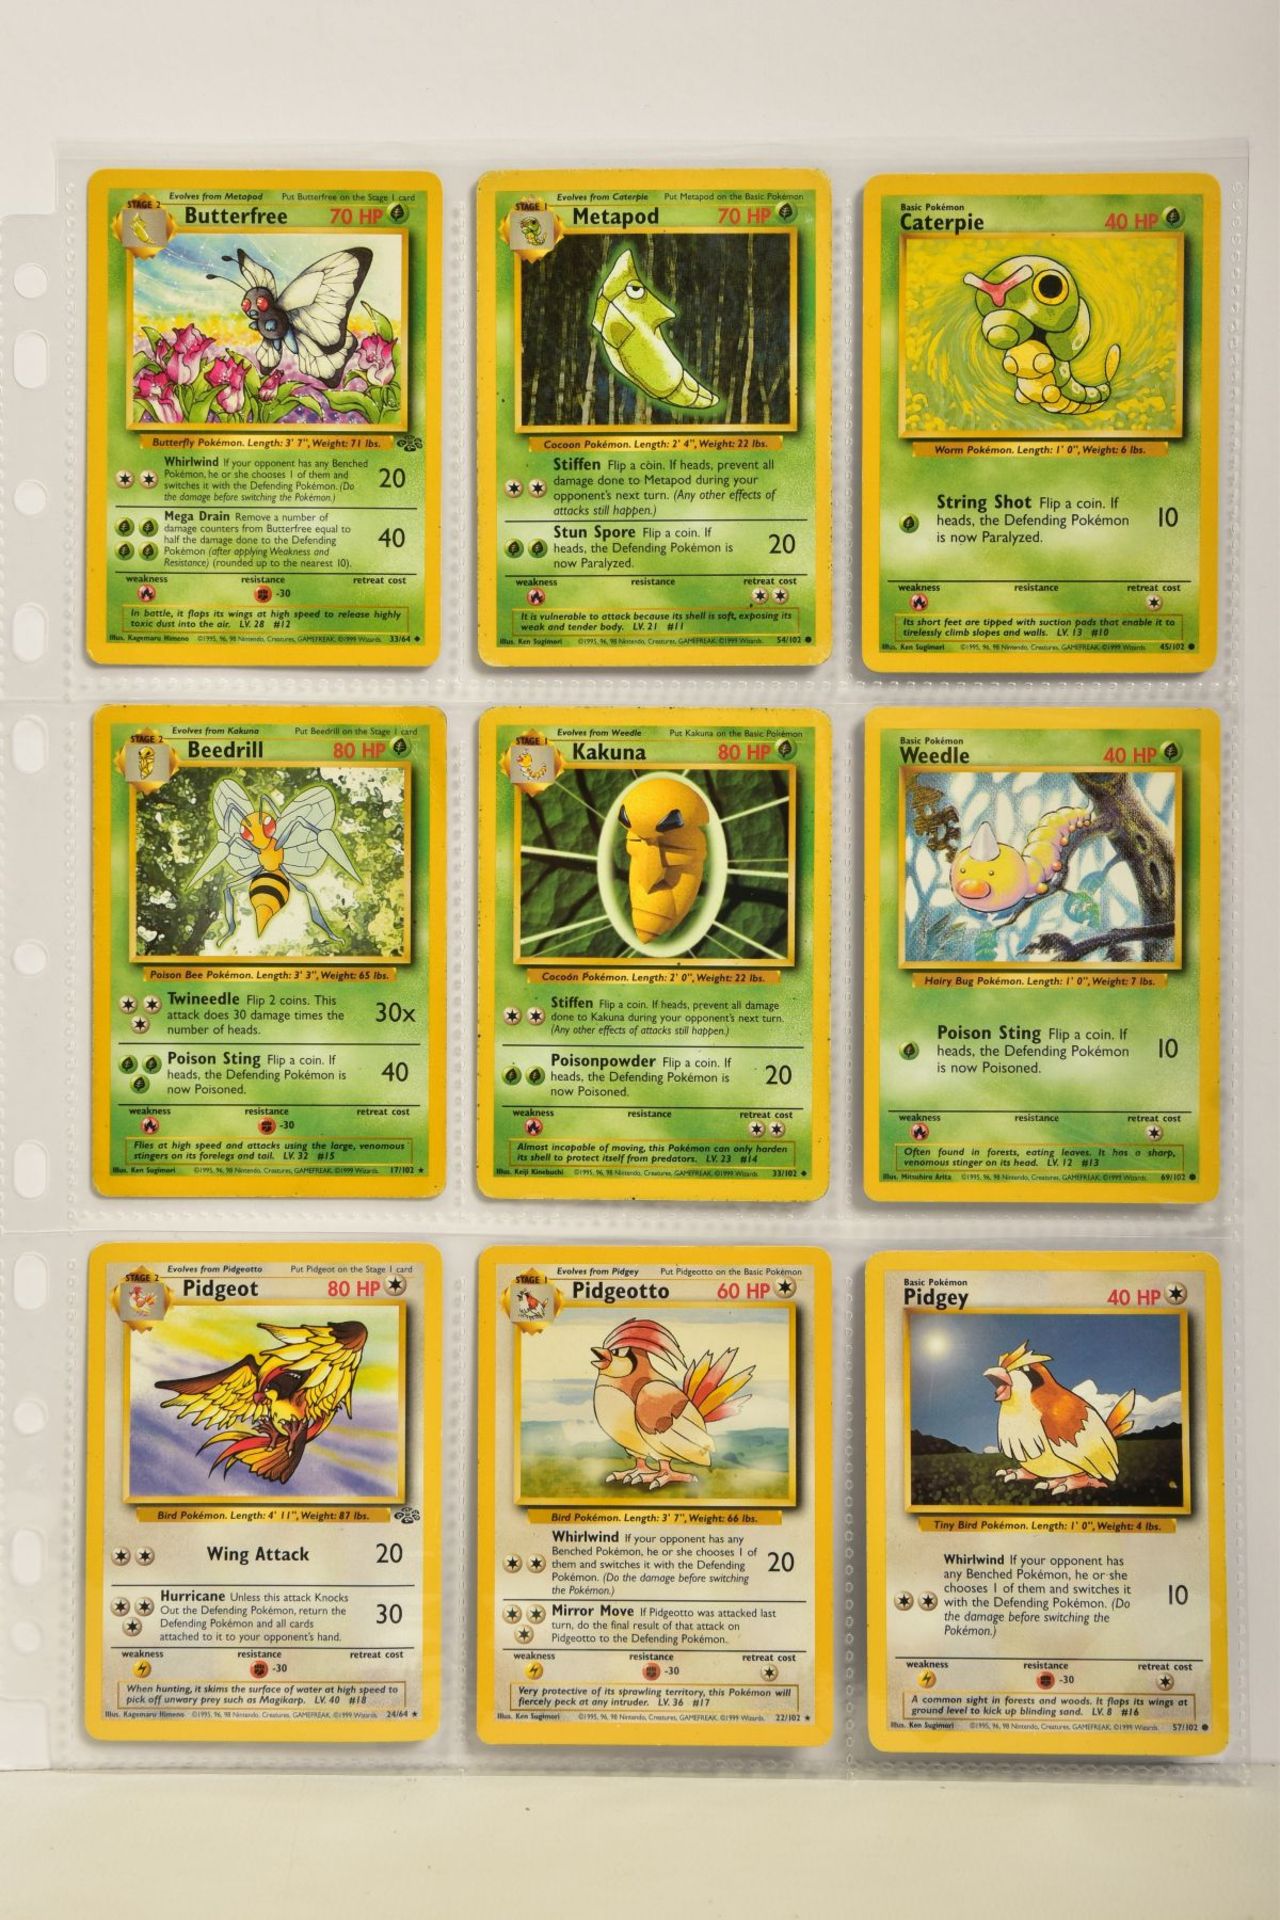 POKEMON THE TRADING CARD GAME 154 CARDS IN POKEMON TCG FOLDER, includes one of each of the - Image 3 of 20